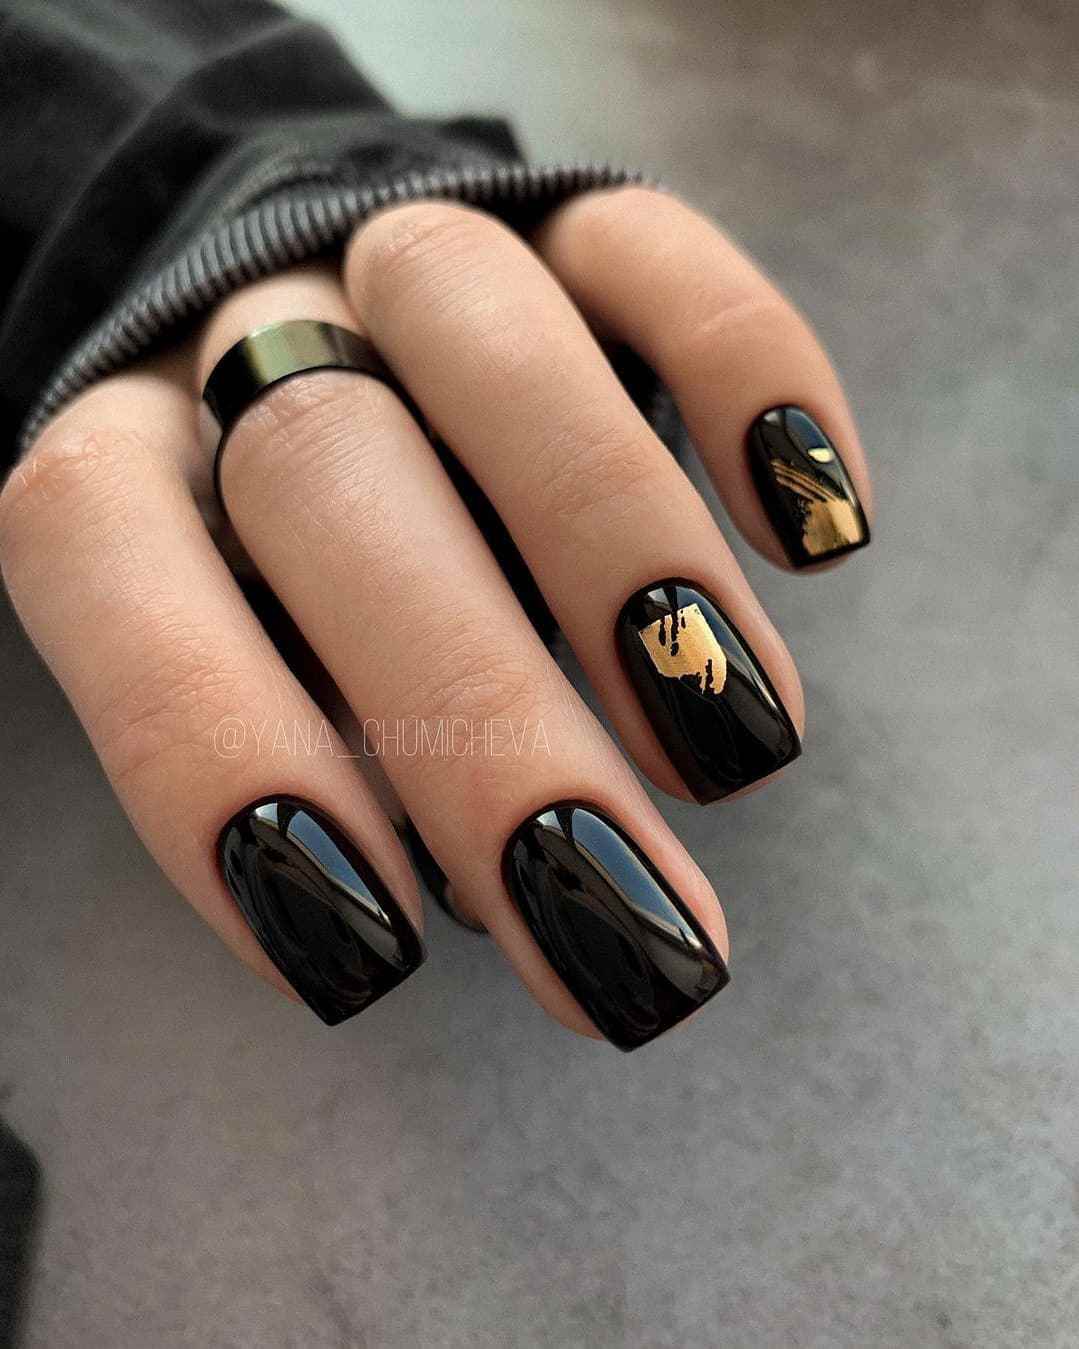 The 100+ Best Nail Designs Trends And Ideas In 2021 images 49